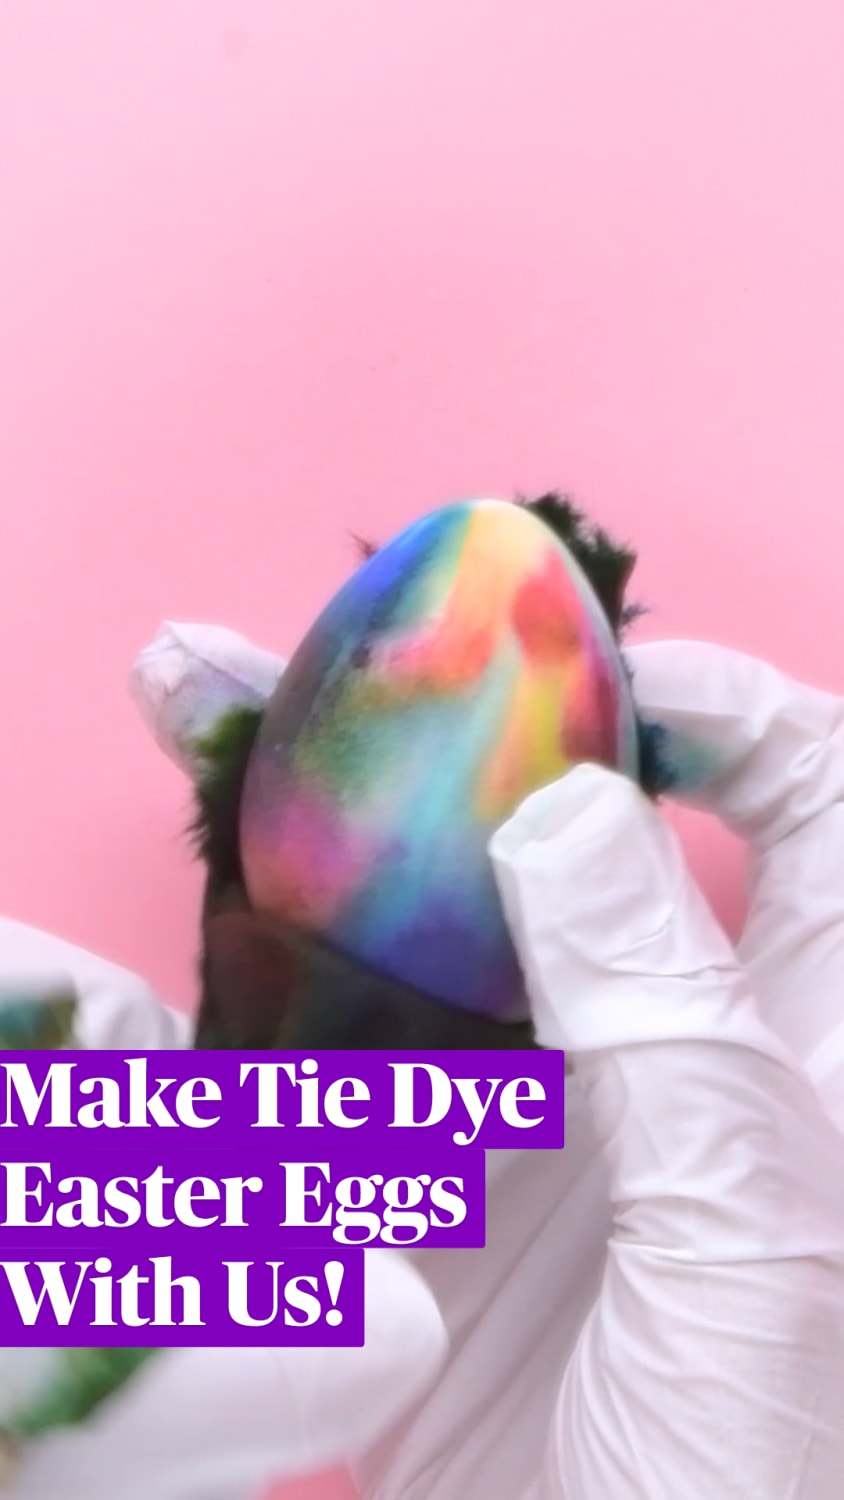 Make Tie Dye Easter Eggs With Us!